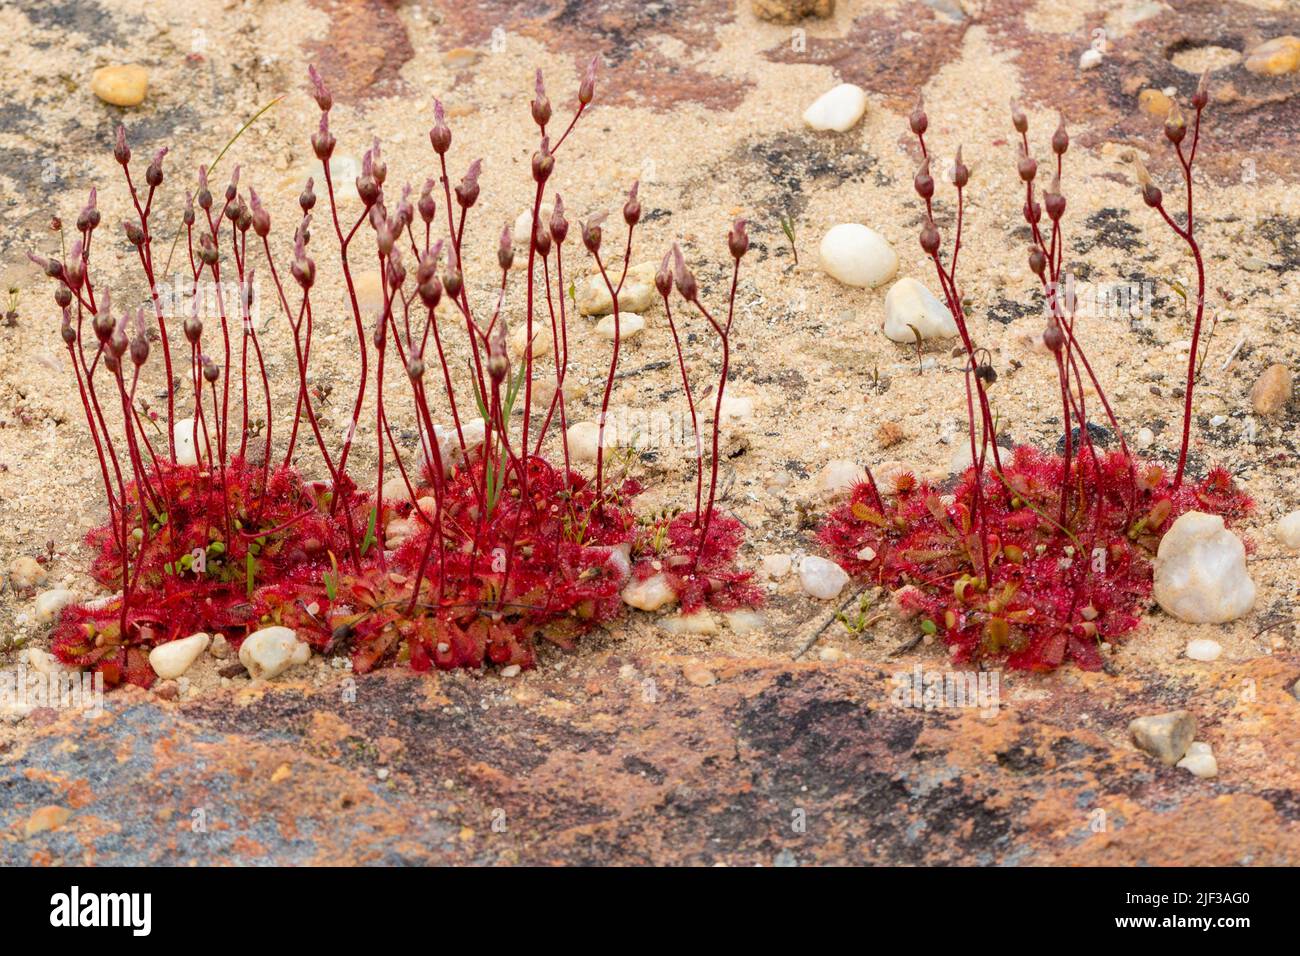 Carnivorous Plants: Flowering Drosera sp. taken near Nieuwoudtville in the Northern Cape of South Africa Stock Photo